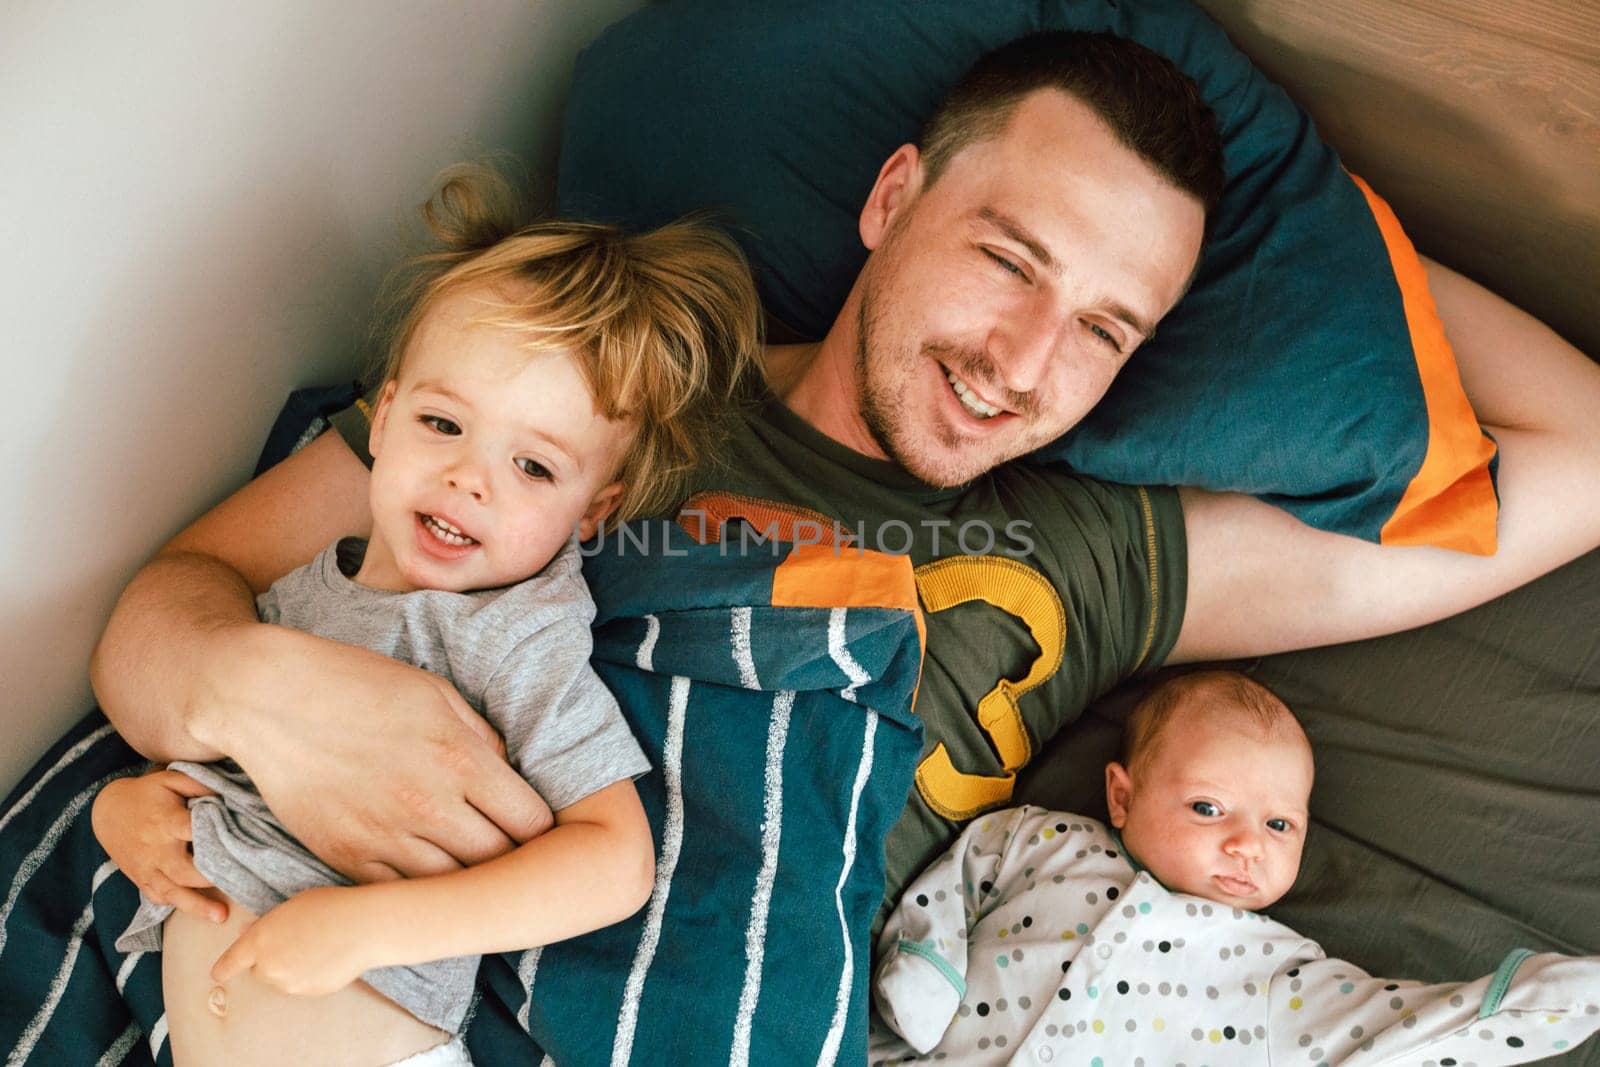 From above view of young handsome man in T-shirt sleeping in bed under blanket with little girl and baby